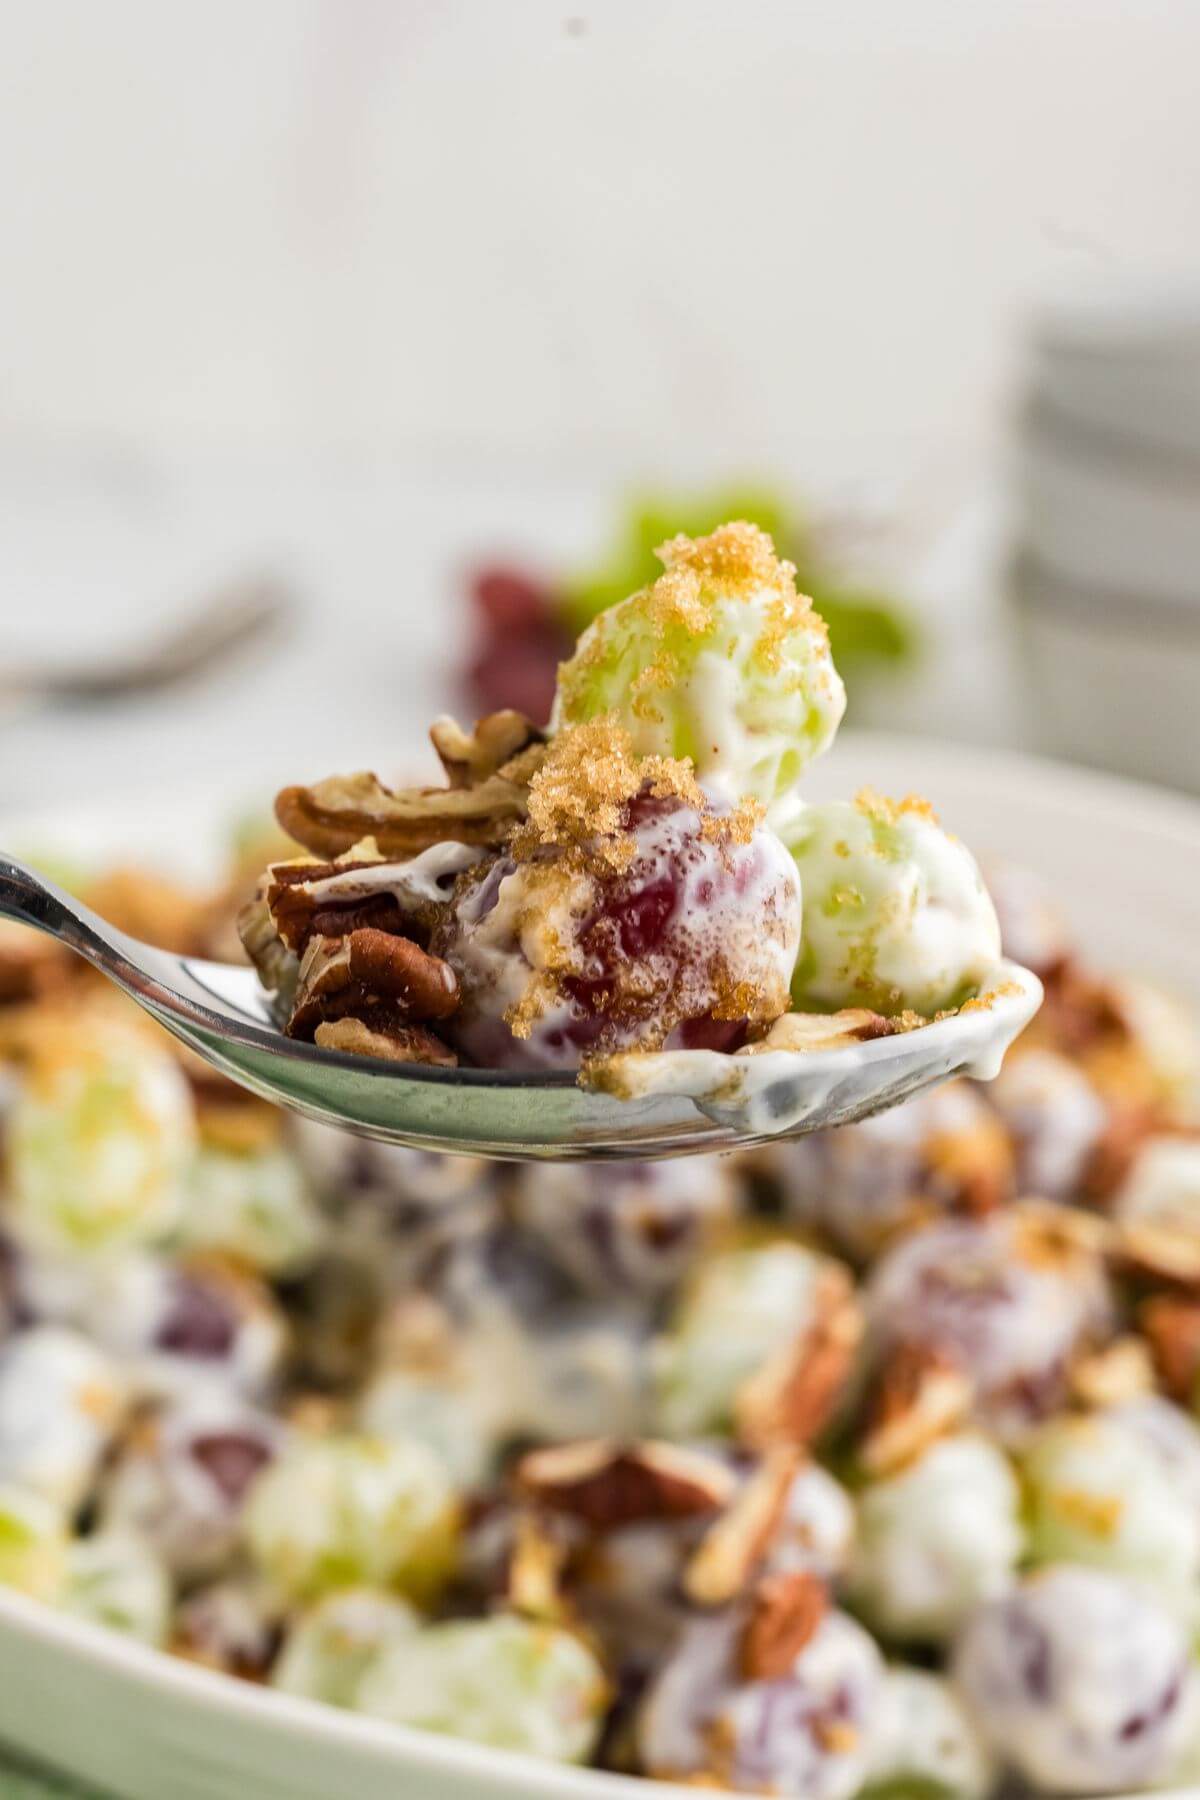 A spoonful of grape salad with crunchy brown sugar and pecans.